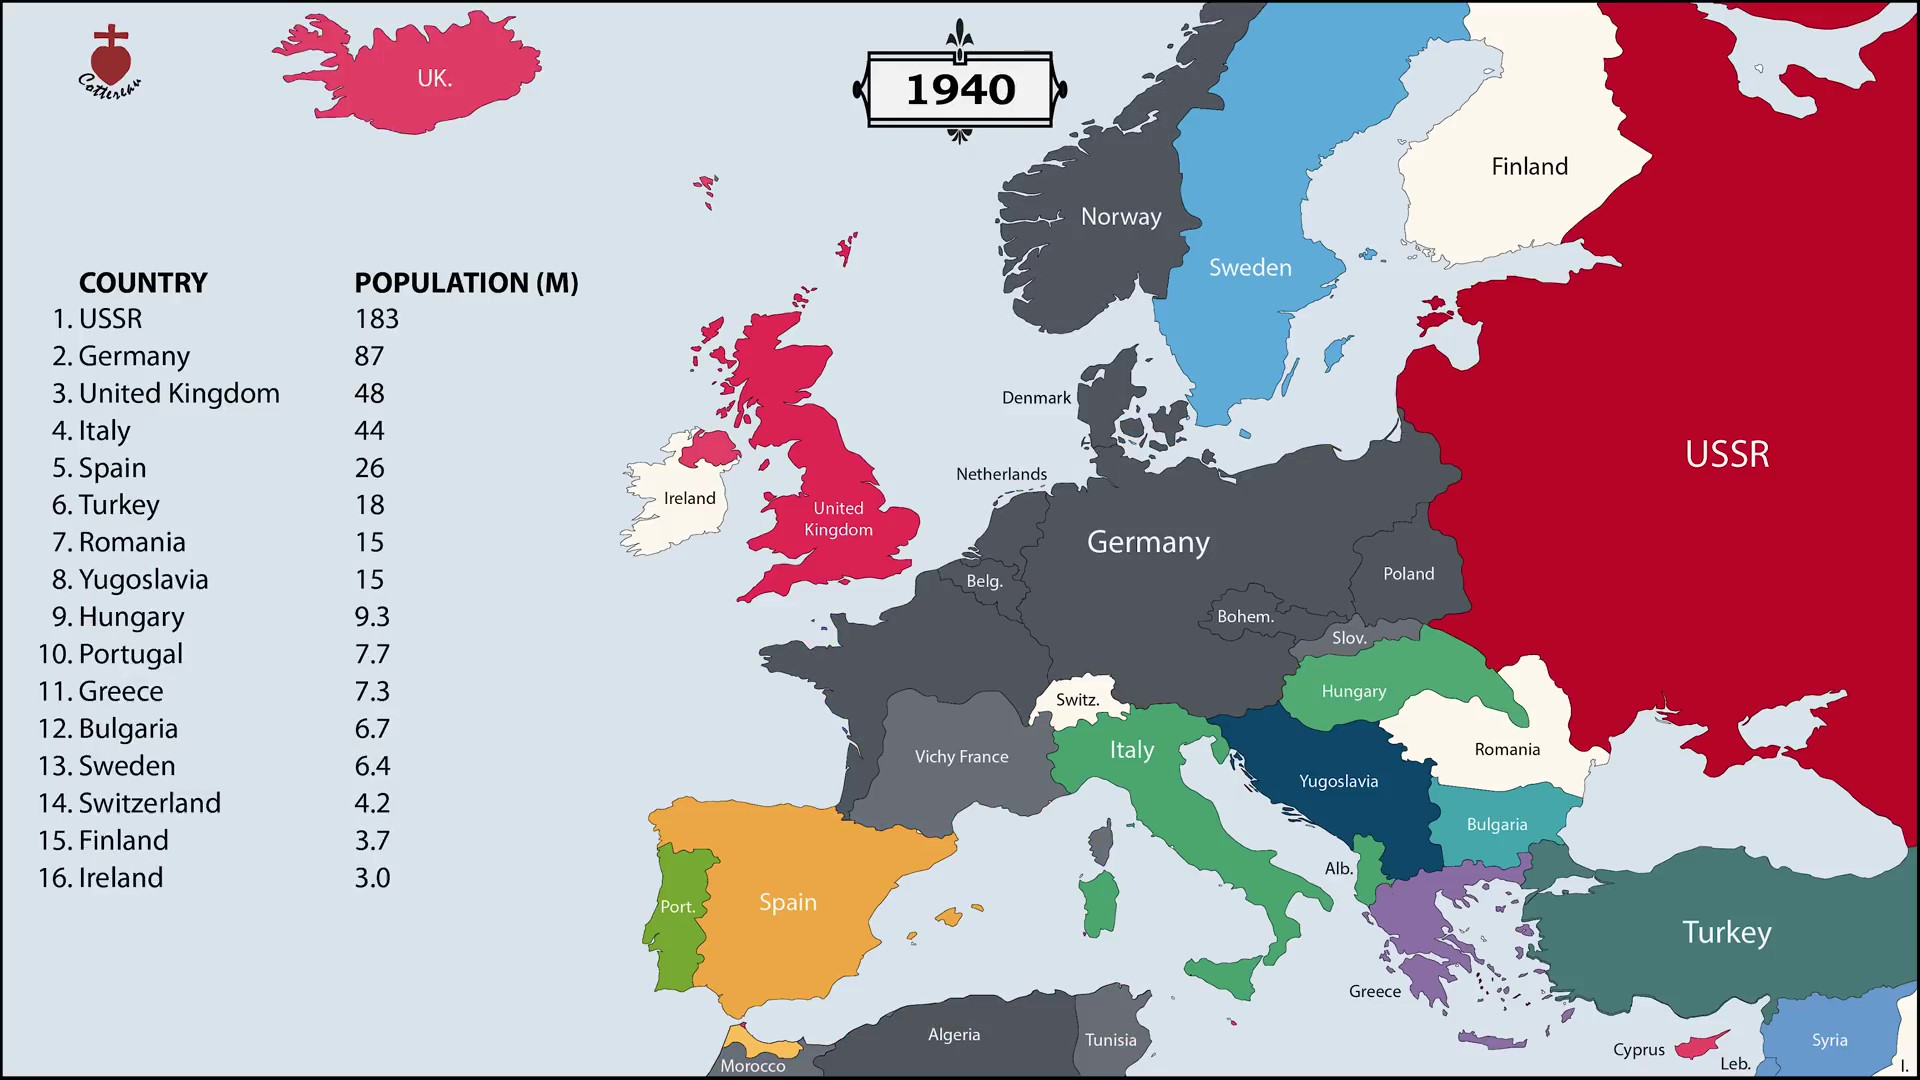 Map Of Europe Borders Watch European Borders Change From 400BC to 2018 (Timelapse Map 